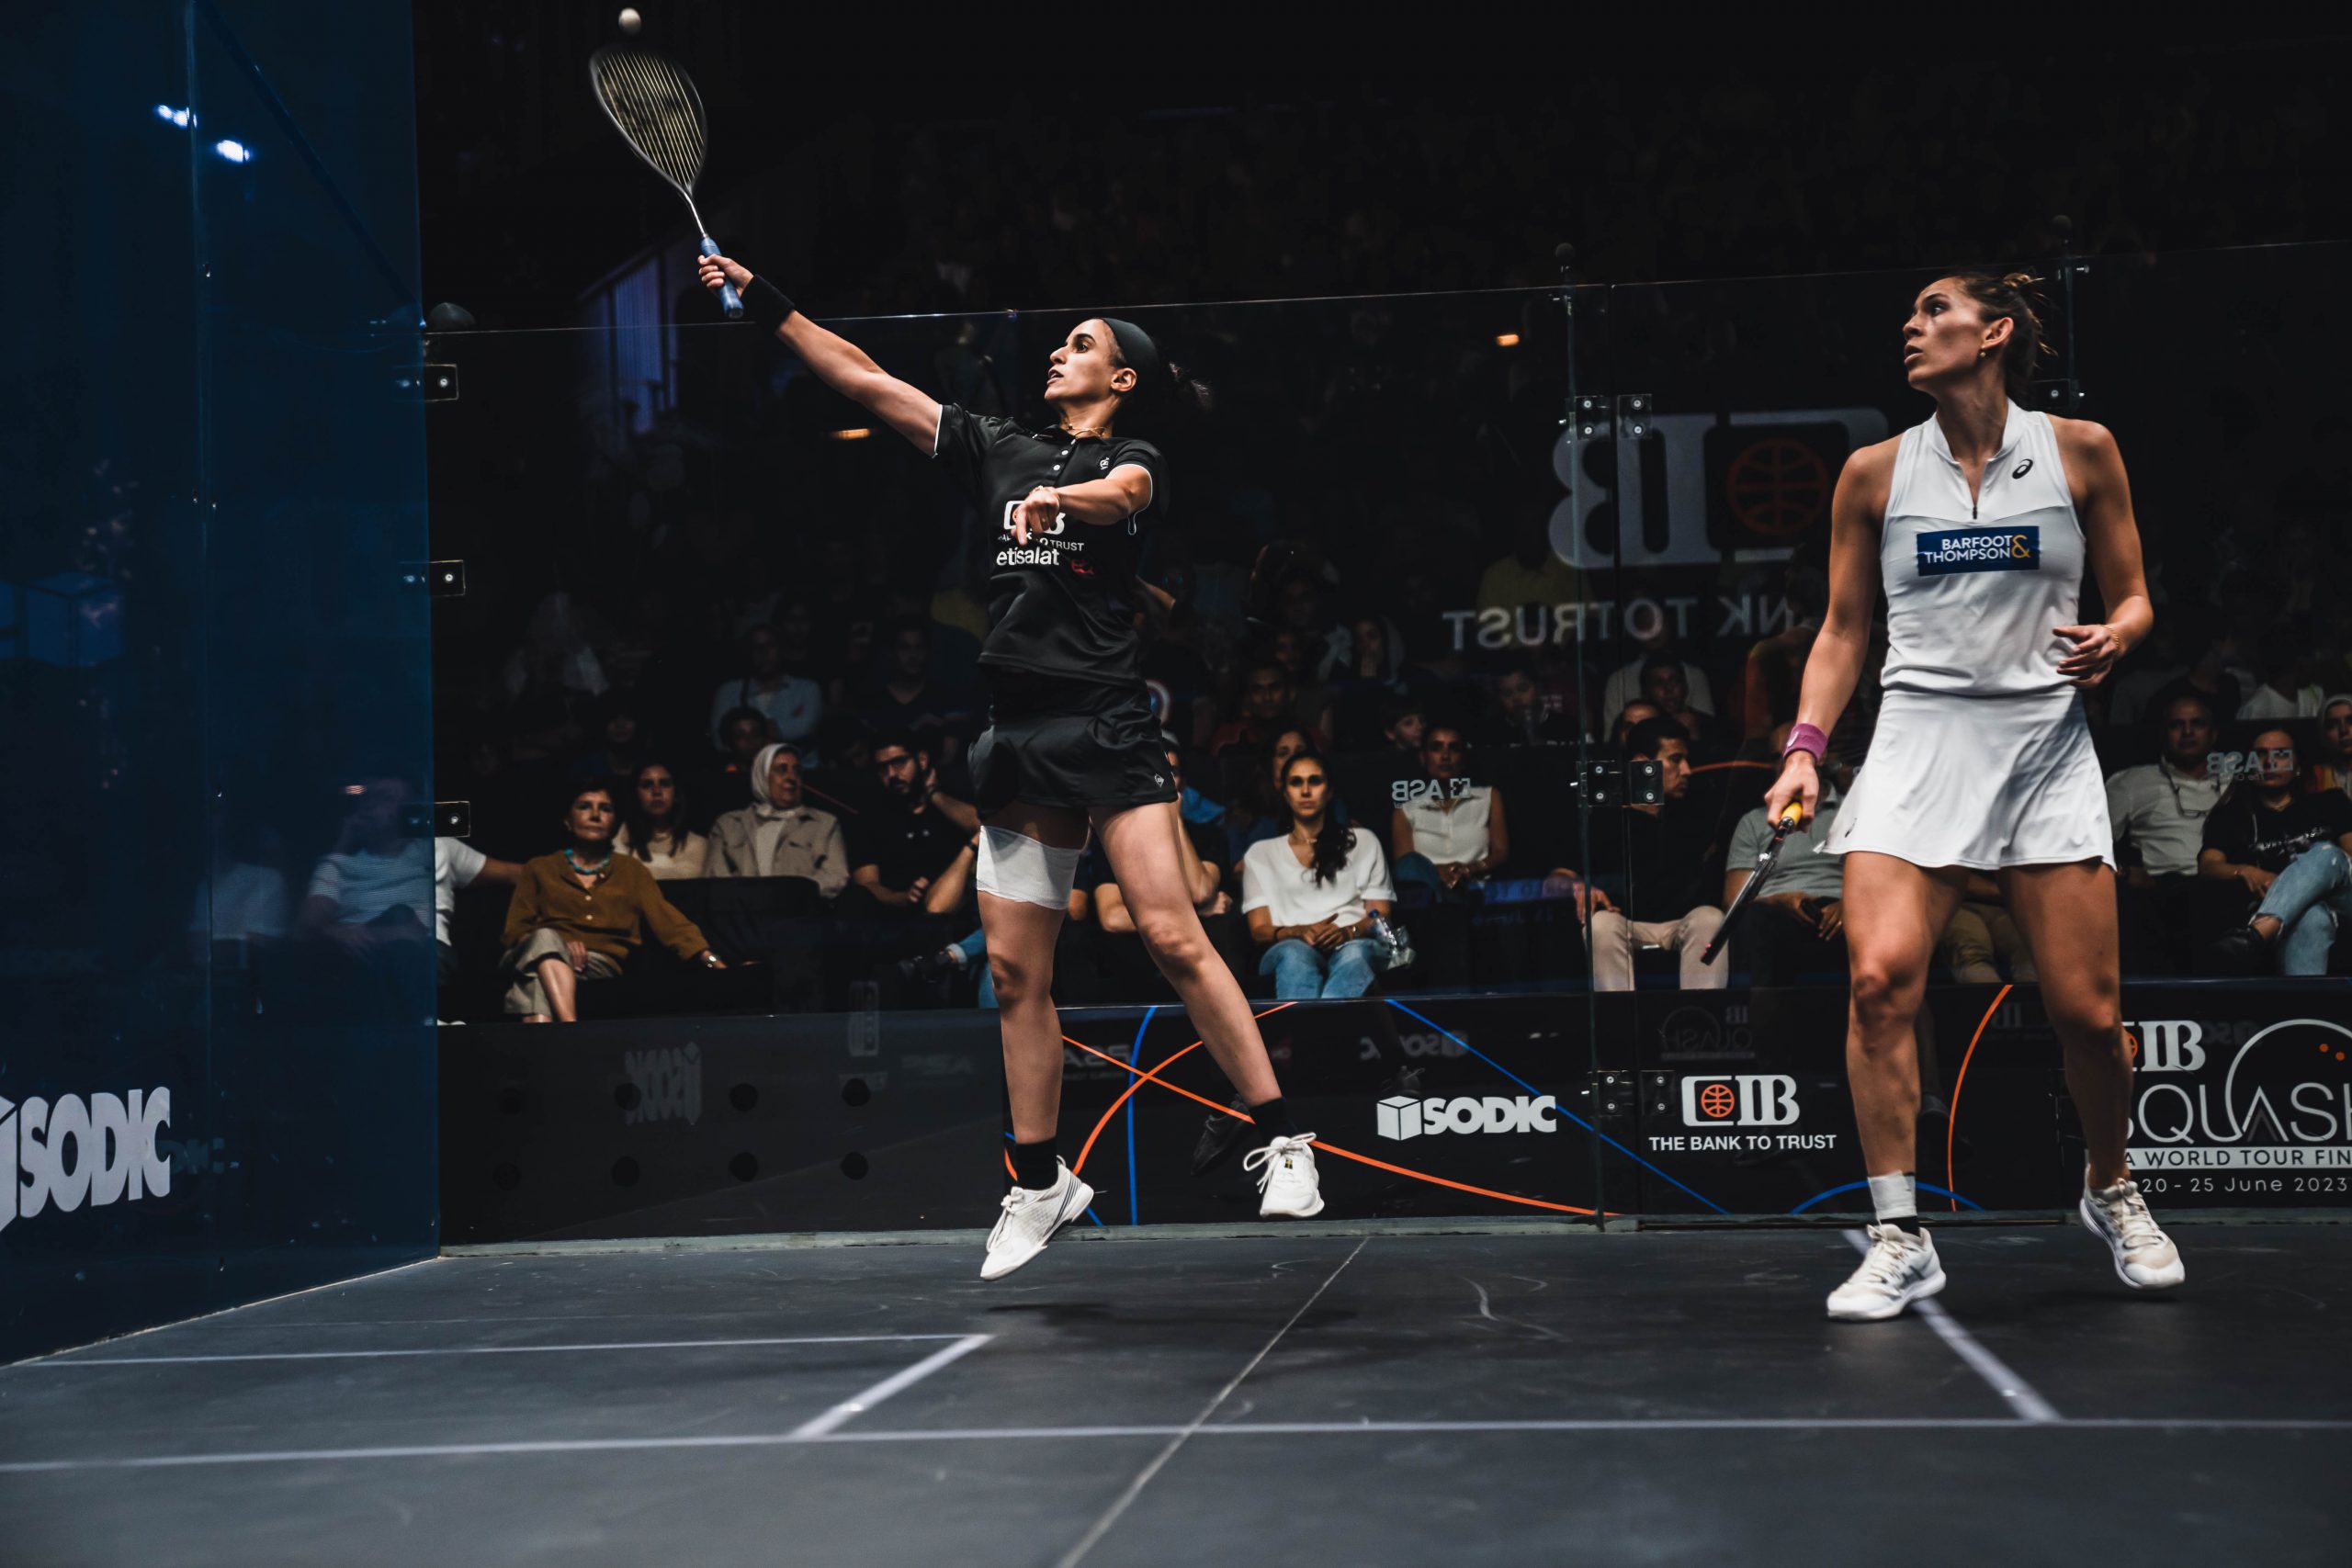 Nour El Tayeb (left) takes on Joelle King (right) during the 2022-23 CIB PSA World Tour Finals.